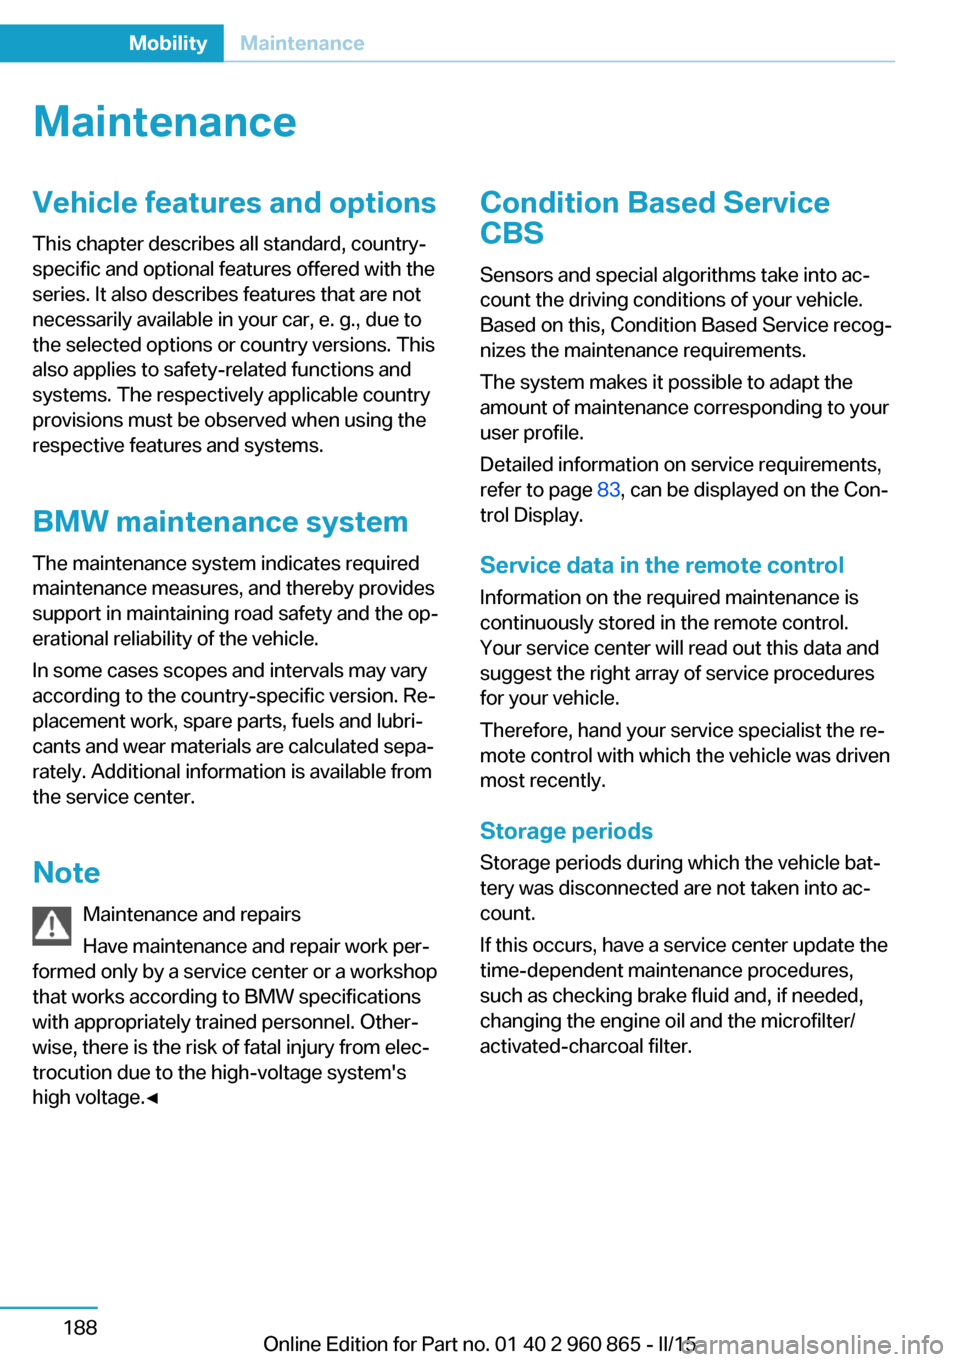 BMW I3 2015 I01 Owners Manual MaintenanceVehicle features and options
This chapter describes all standard, country-
specific and optional features offered with the
series. It also describes features that are not
necessarily availa